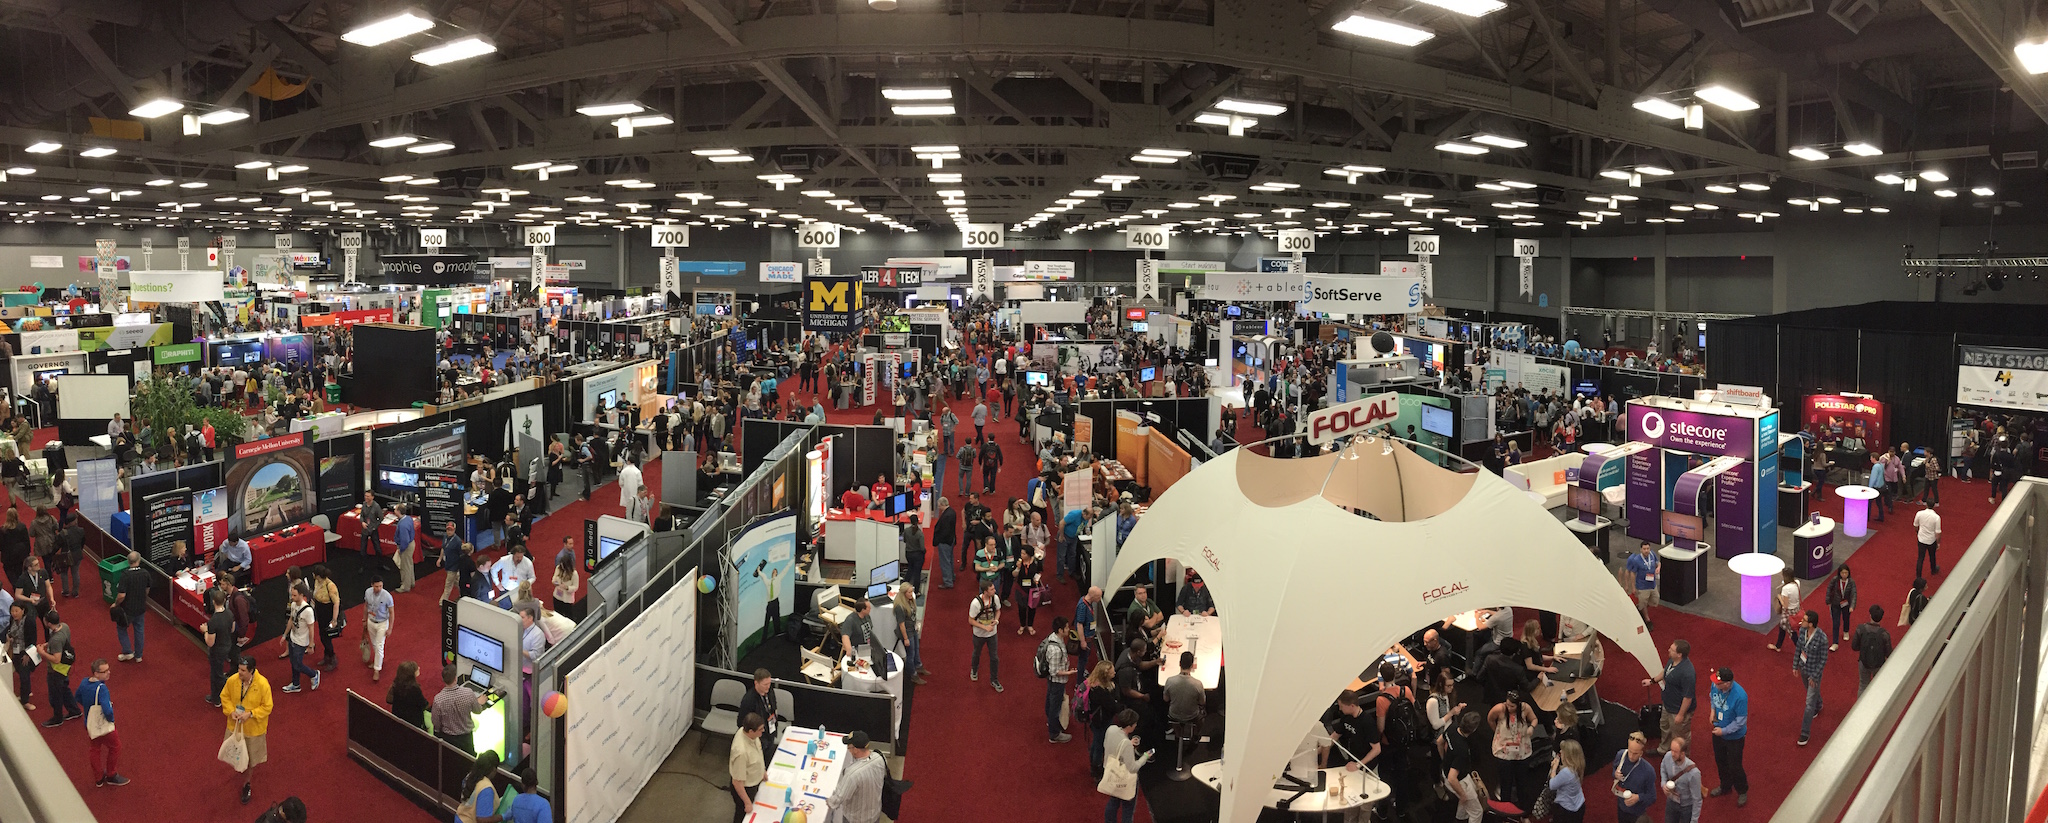 As You Consider Attending SXSW 2016, Here's What Was Awesome About SXSW ...